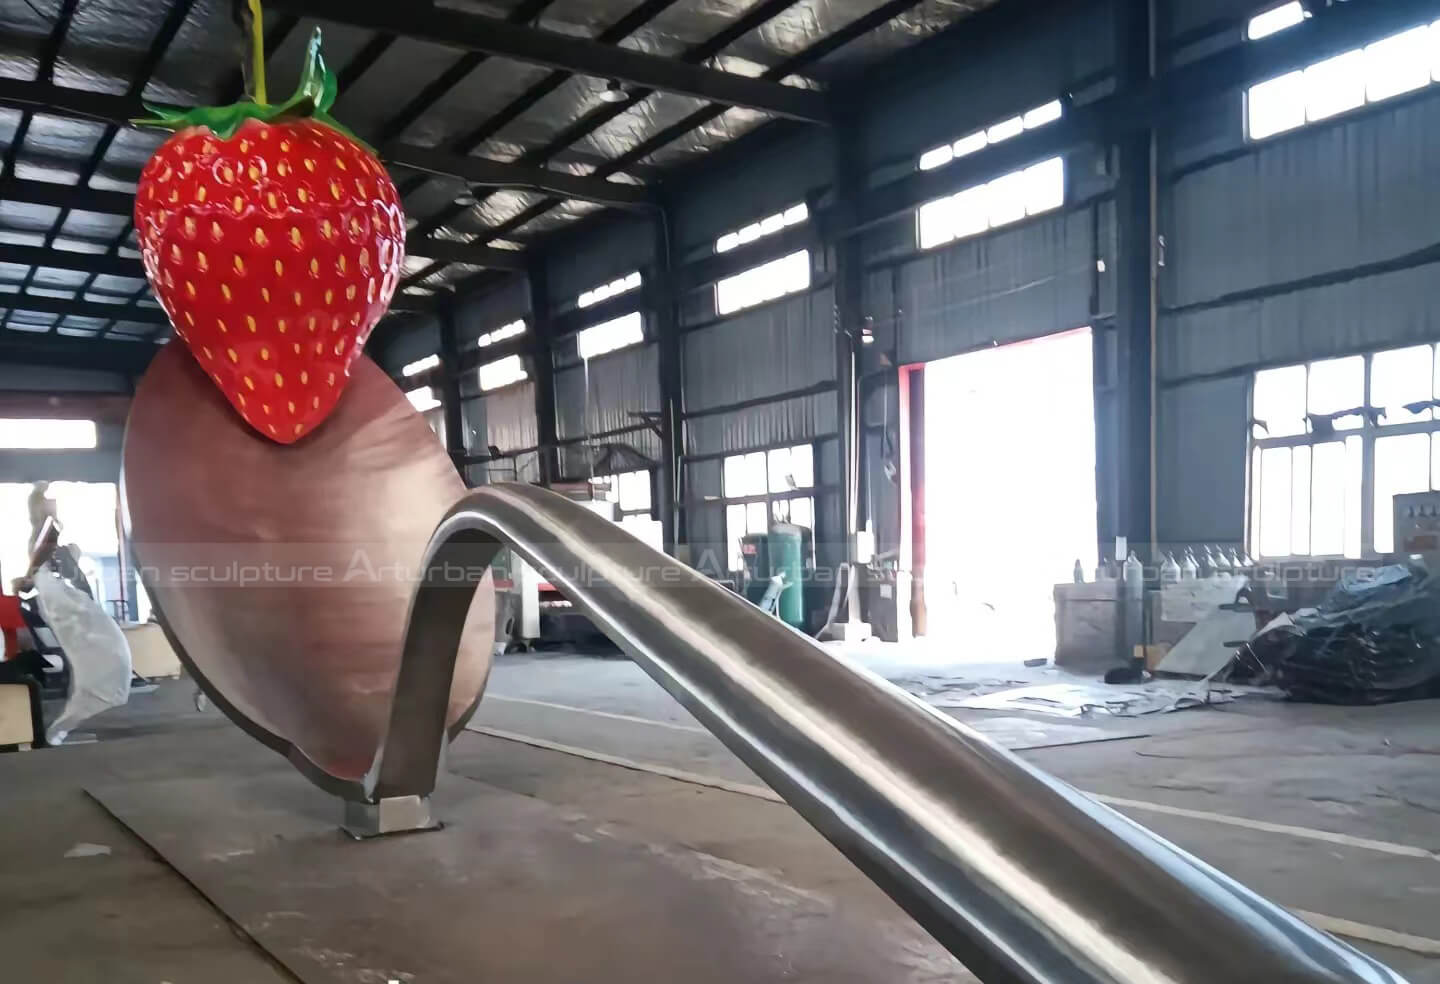 spoon and strawberry statue